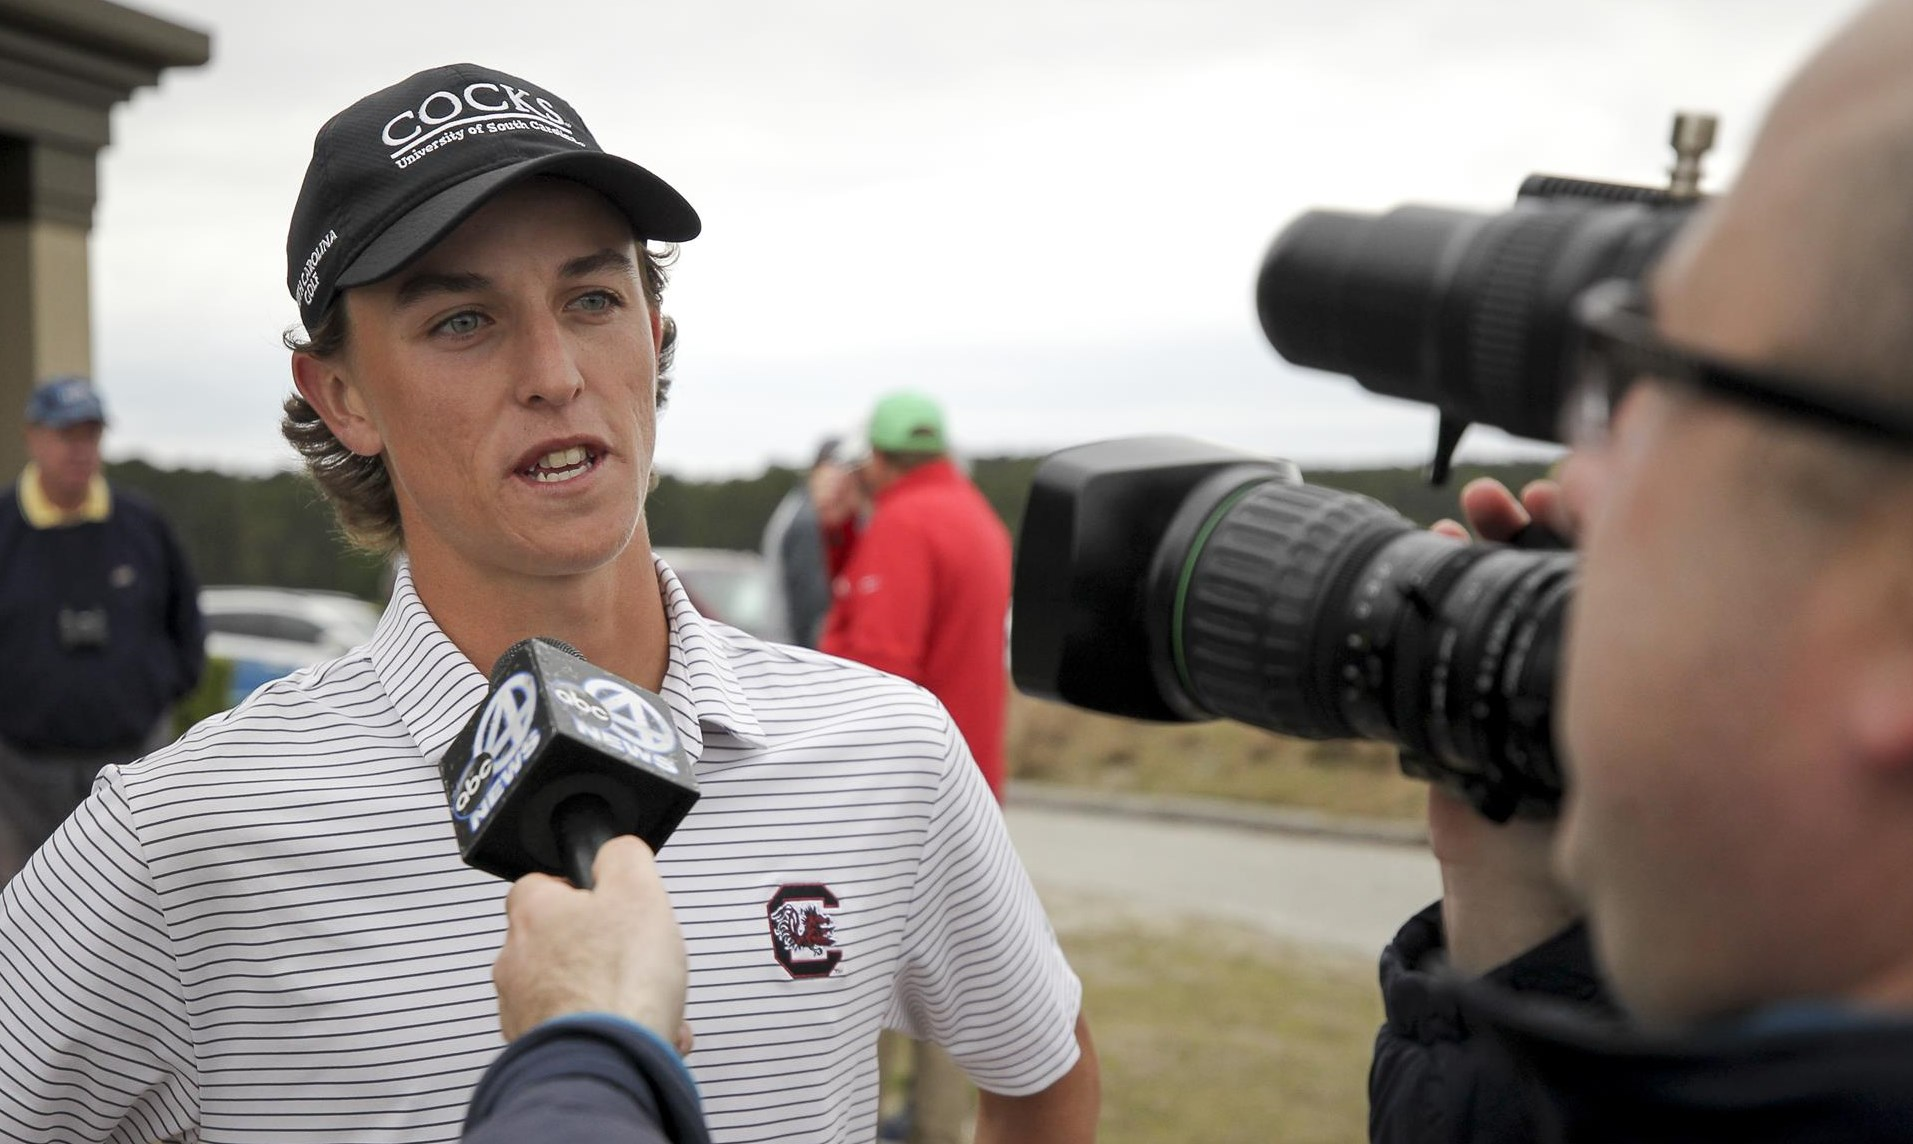 Wilson Tied for Lead After Round One at Bulls Bay